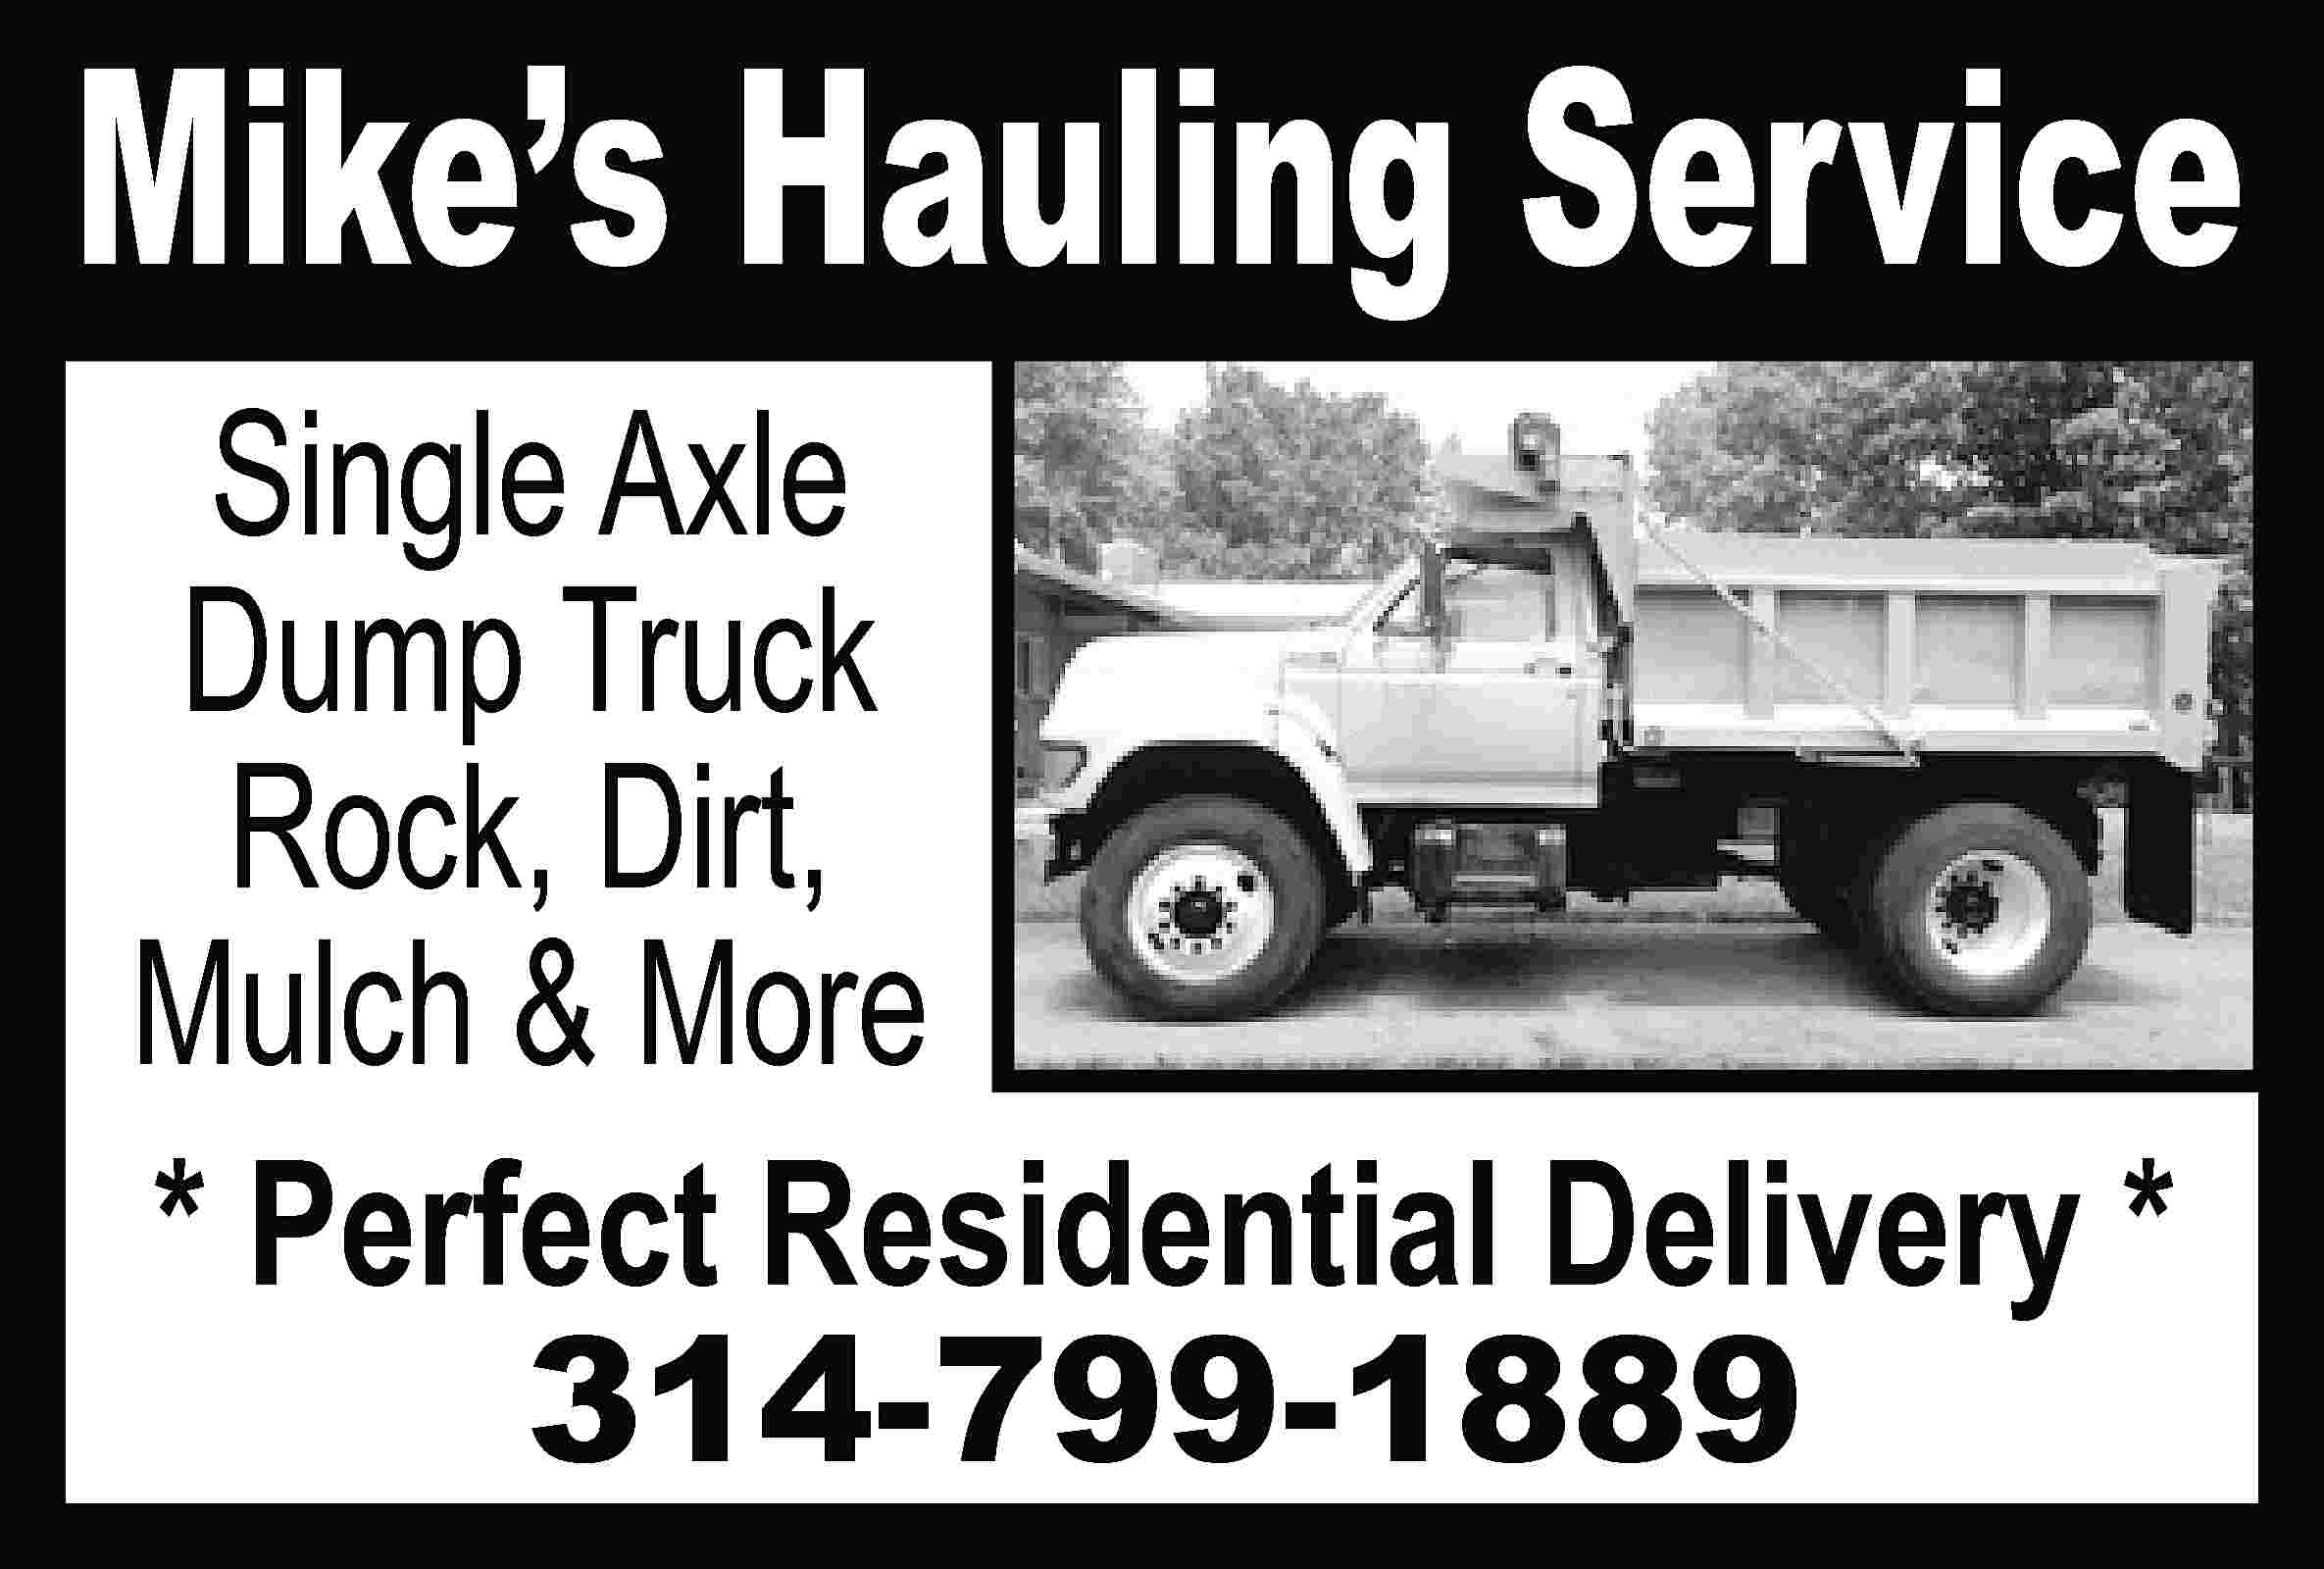 Mike’s Hauling Service Single Axle  Mike’s Hauling Service Single Axle Dump Truck Rock, Dirt, Mulch & More * Perfect Residential Delivery * 314-799-1889